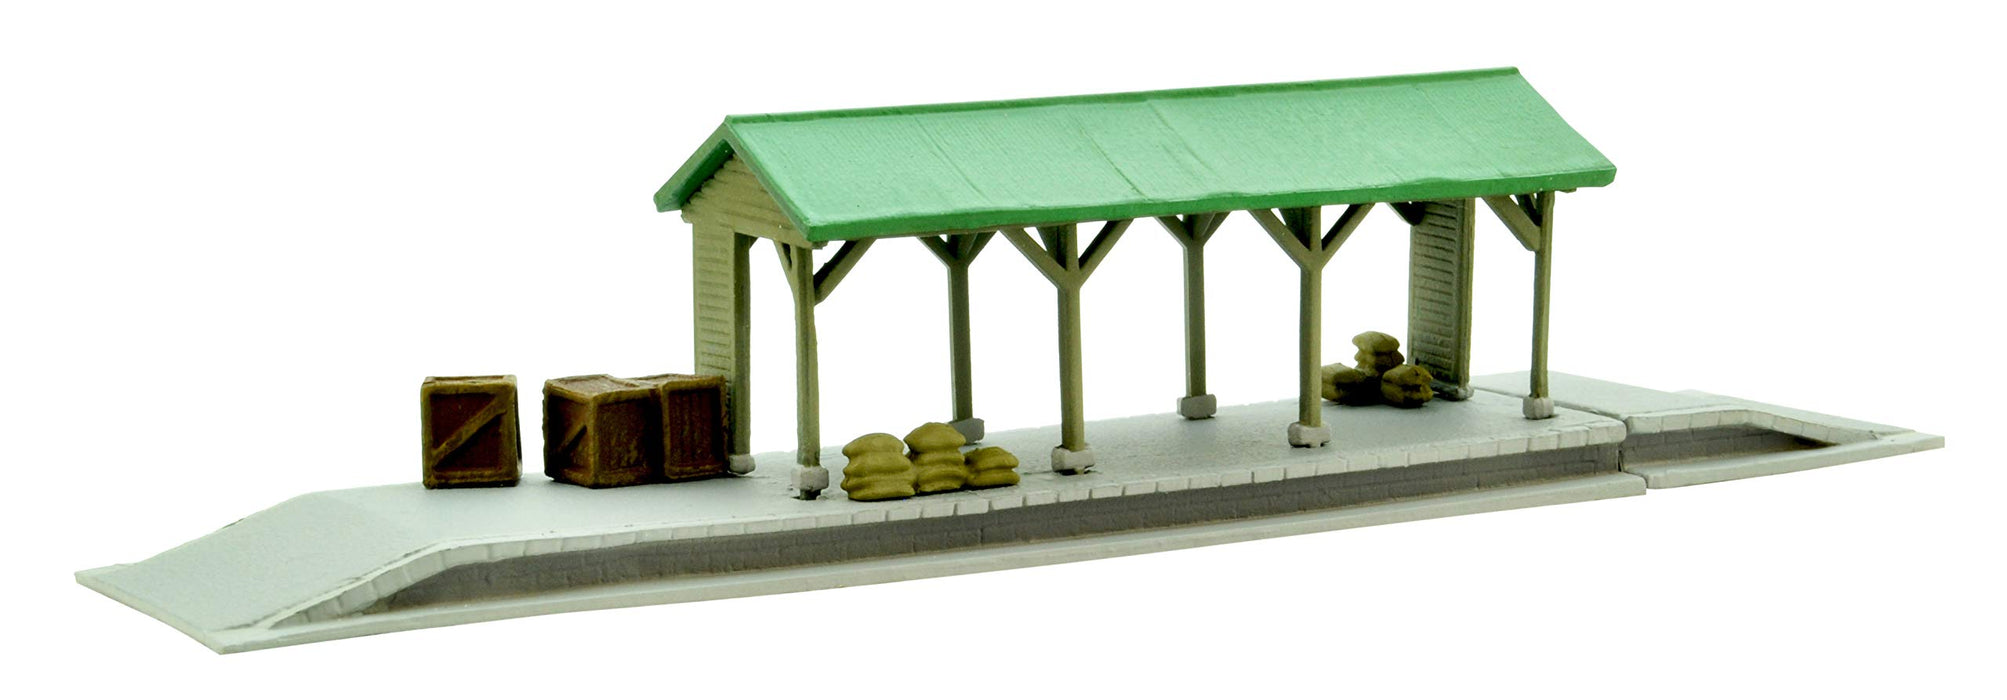 Tomytec Building Collection Station C4 Low Platform for Cargo Kenkore 022-4 Diorama Supplies